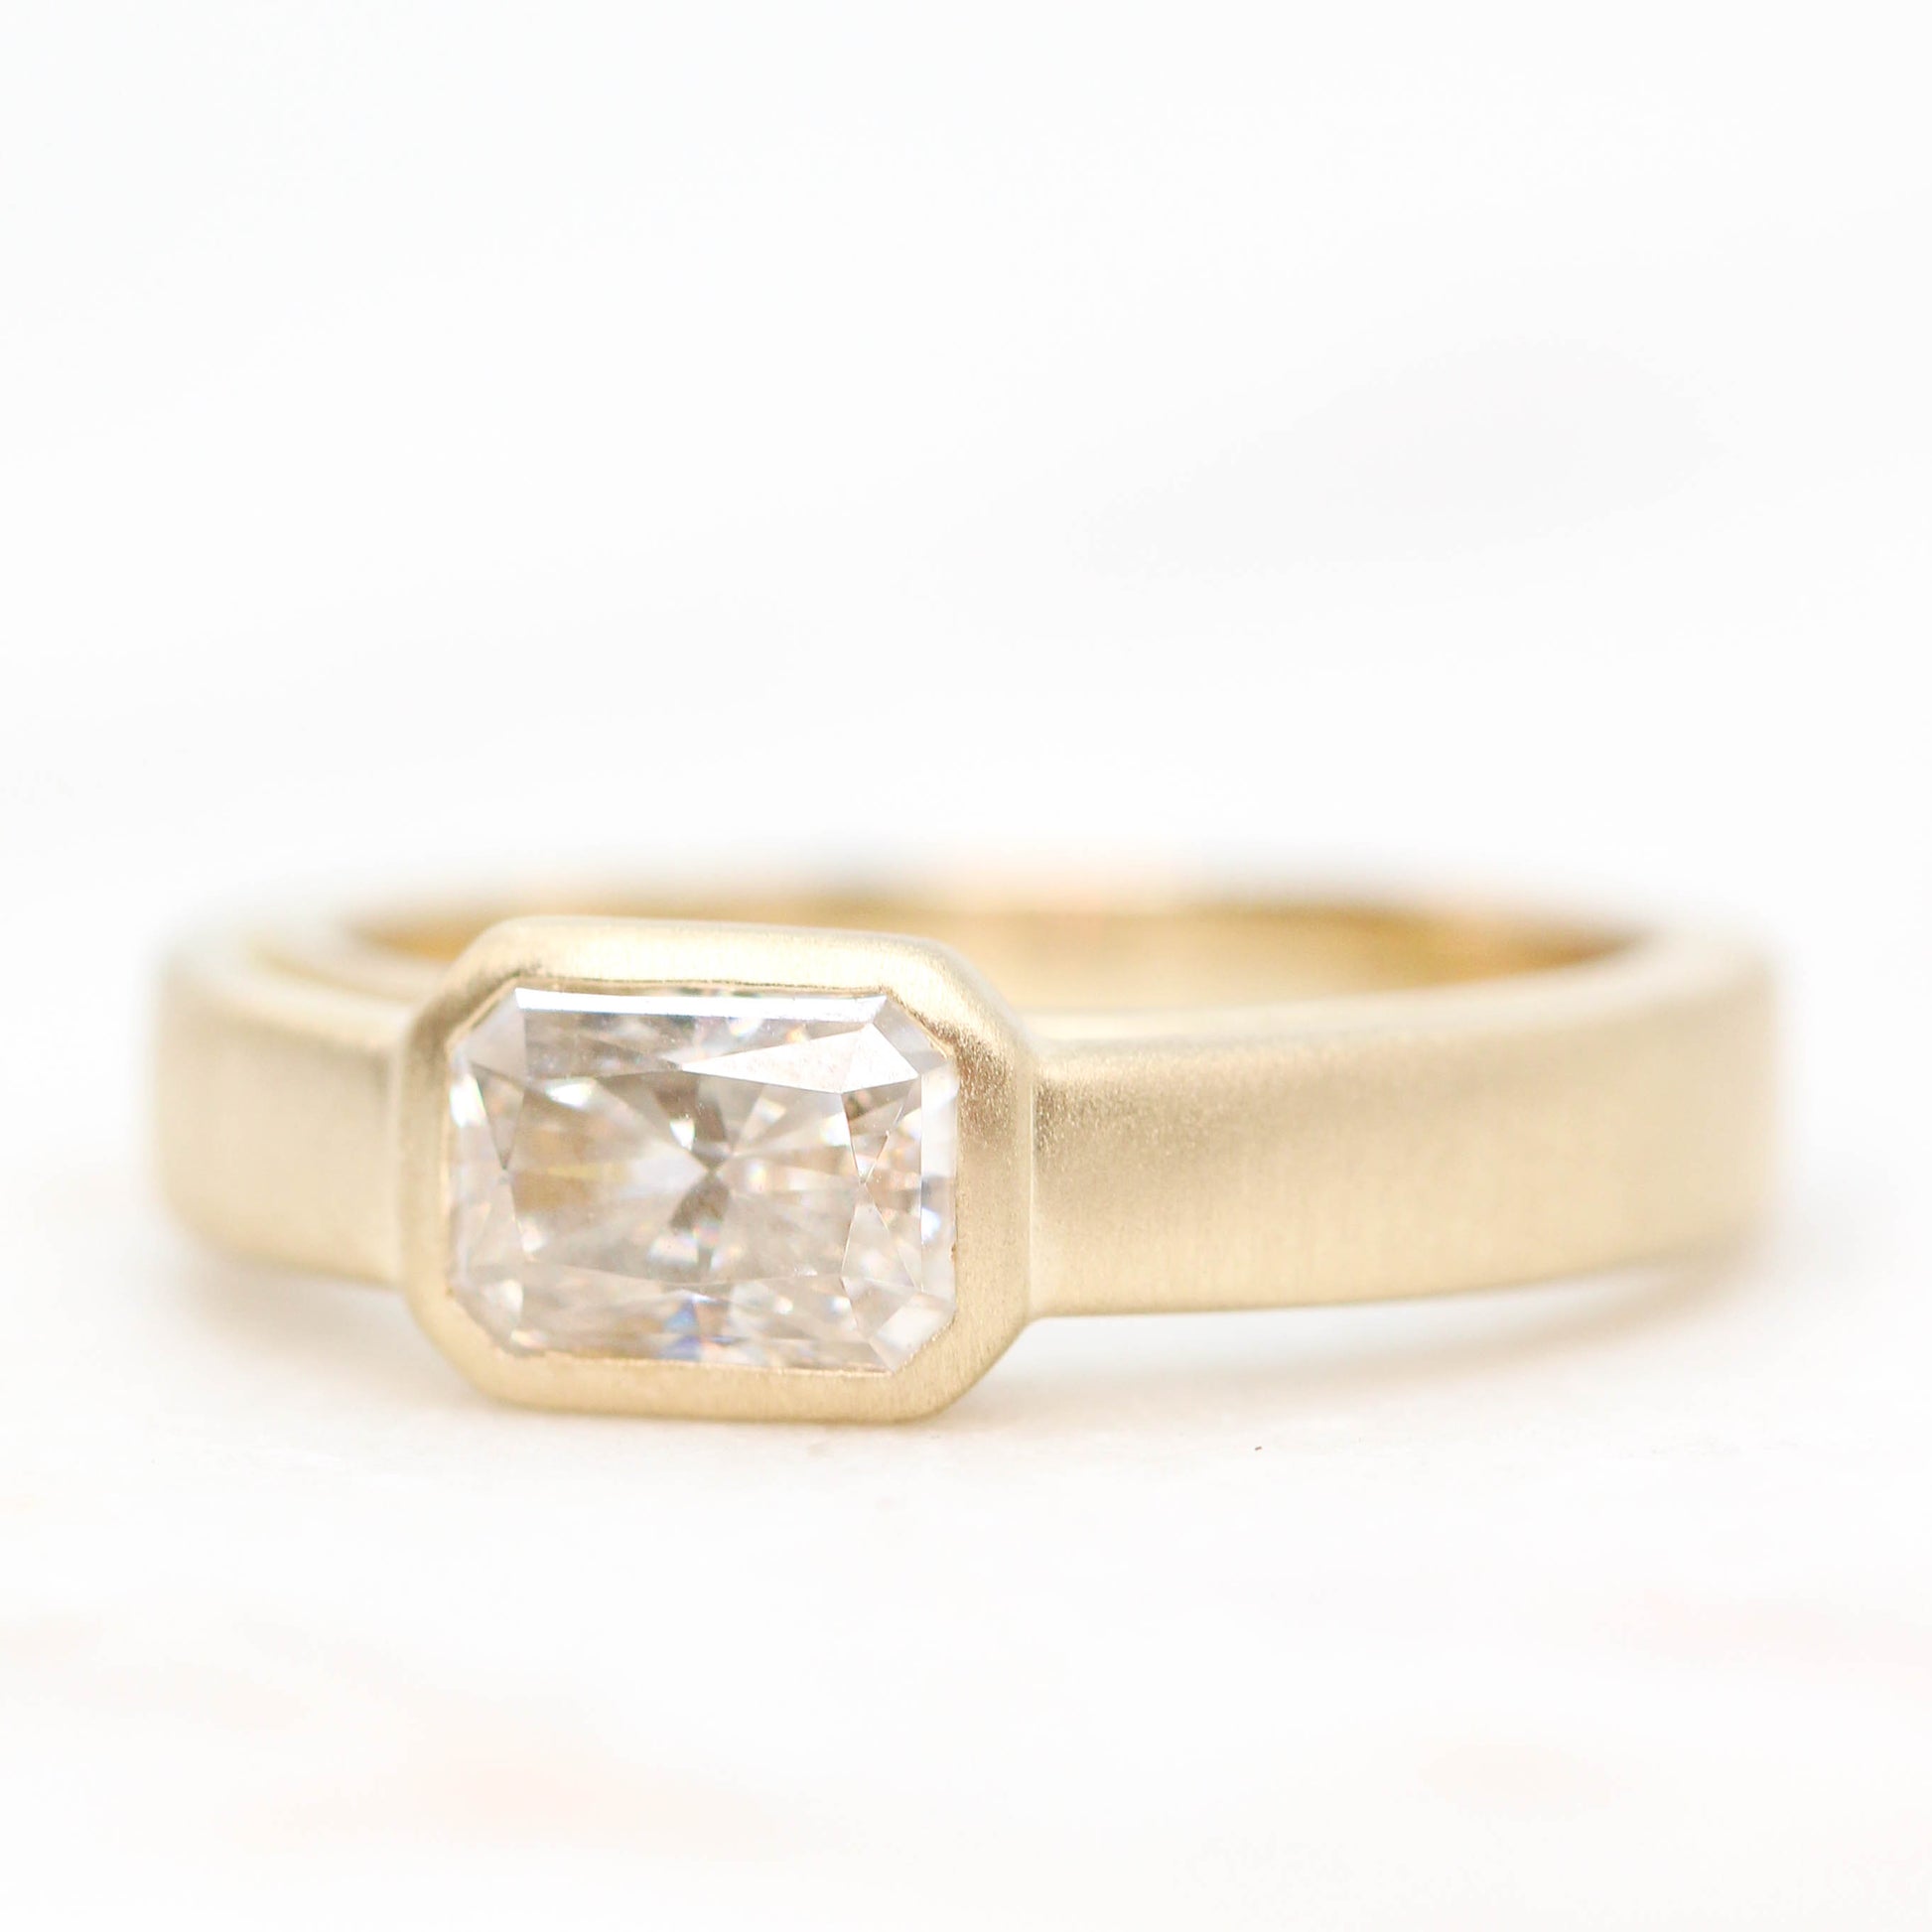 Mabel Ring Bezel Set Radiant Cut Moissanite - Made to Order, Choose Your Gold Tone - Midwinter Co. Alternative Bridal Rings and Modern Fine Jewelry